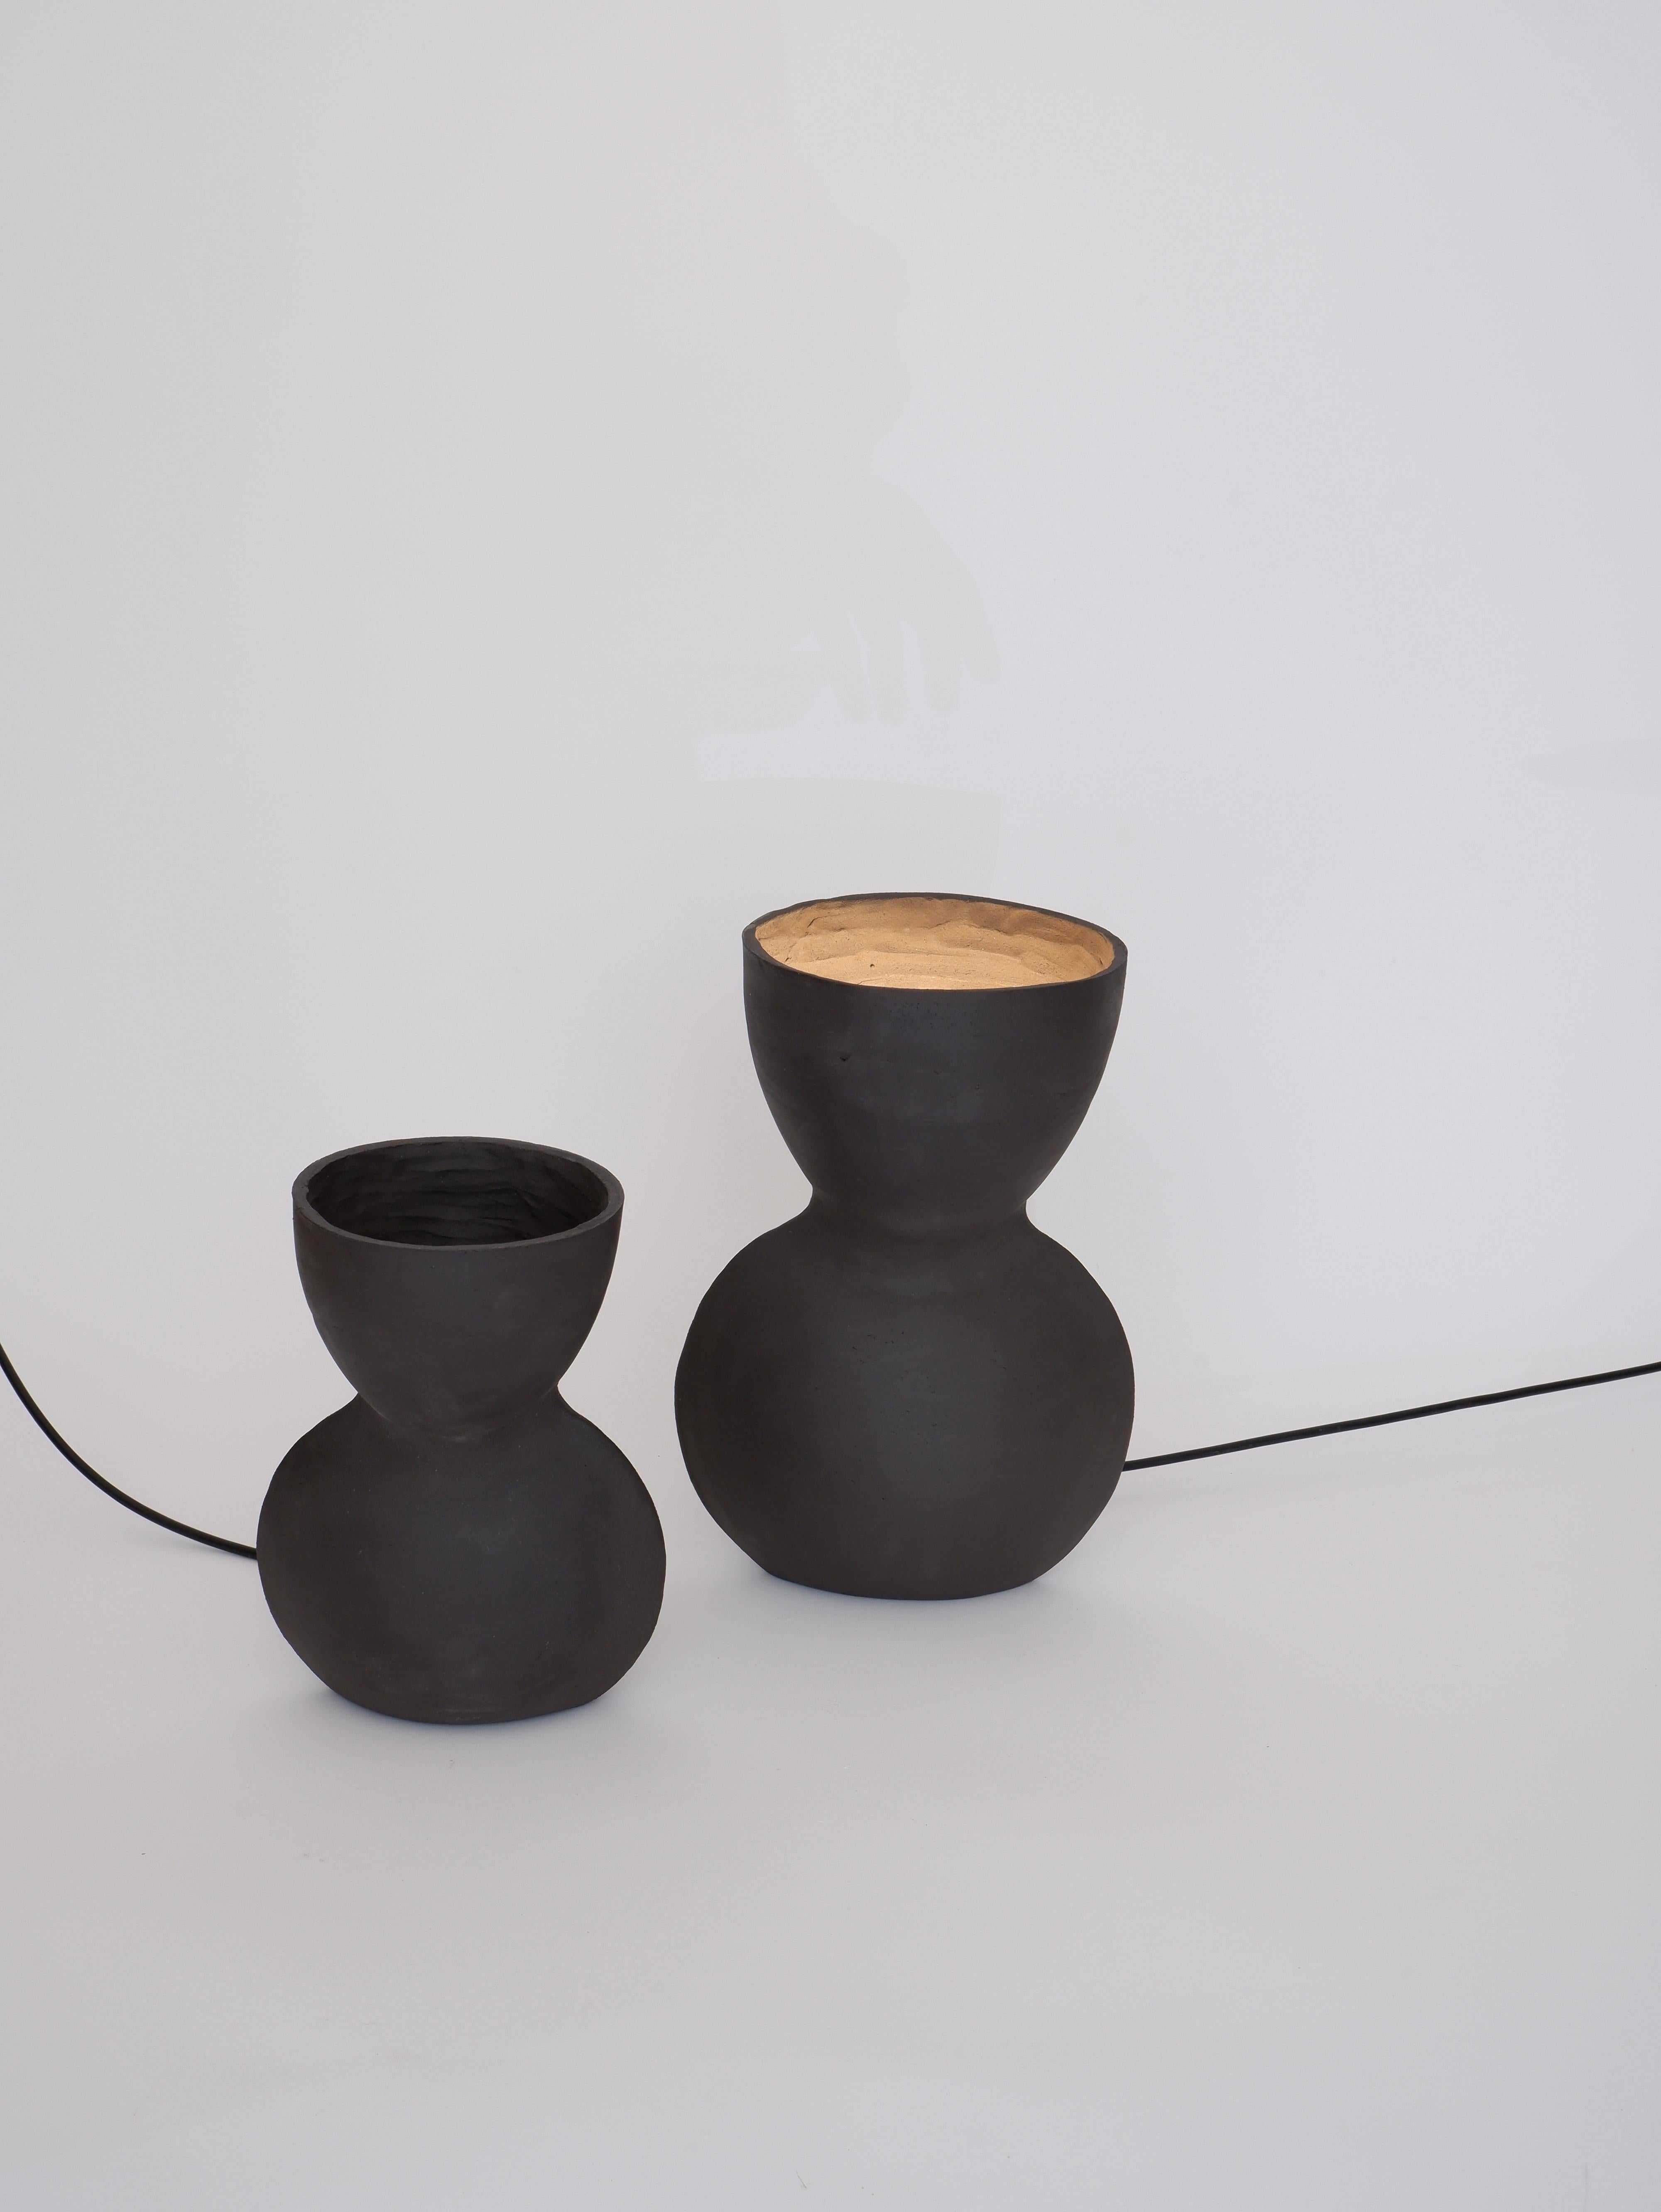 Set Of 2 Unira Black Lamps by Ia Kutateladze
One Of A Kind.
Dimensions: Small: D 14 x W 18 x H 25 cm.
Big: D 17 x W 23 x H 32 cm. 
Materials: Clay.

Each piece is one of a kind, due to its free hand-building process. Different color variations